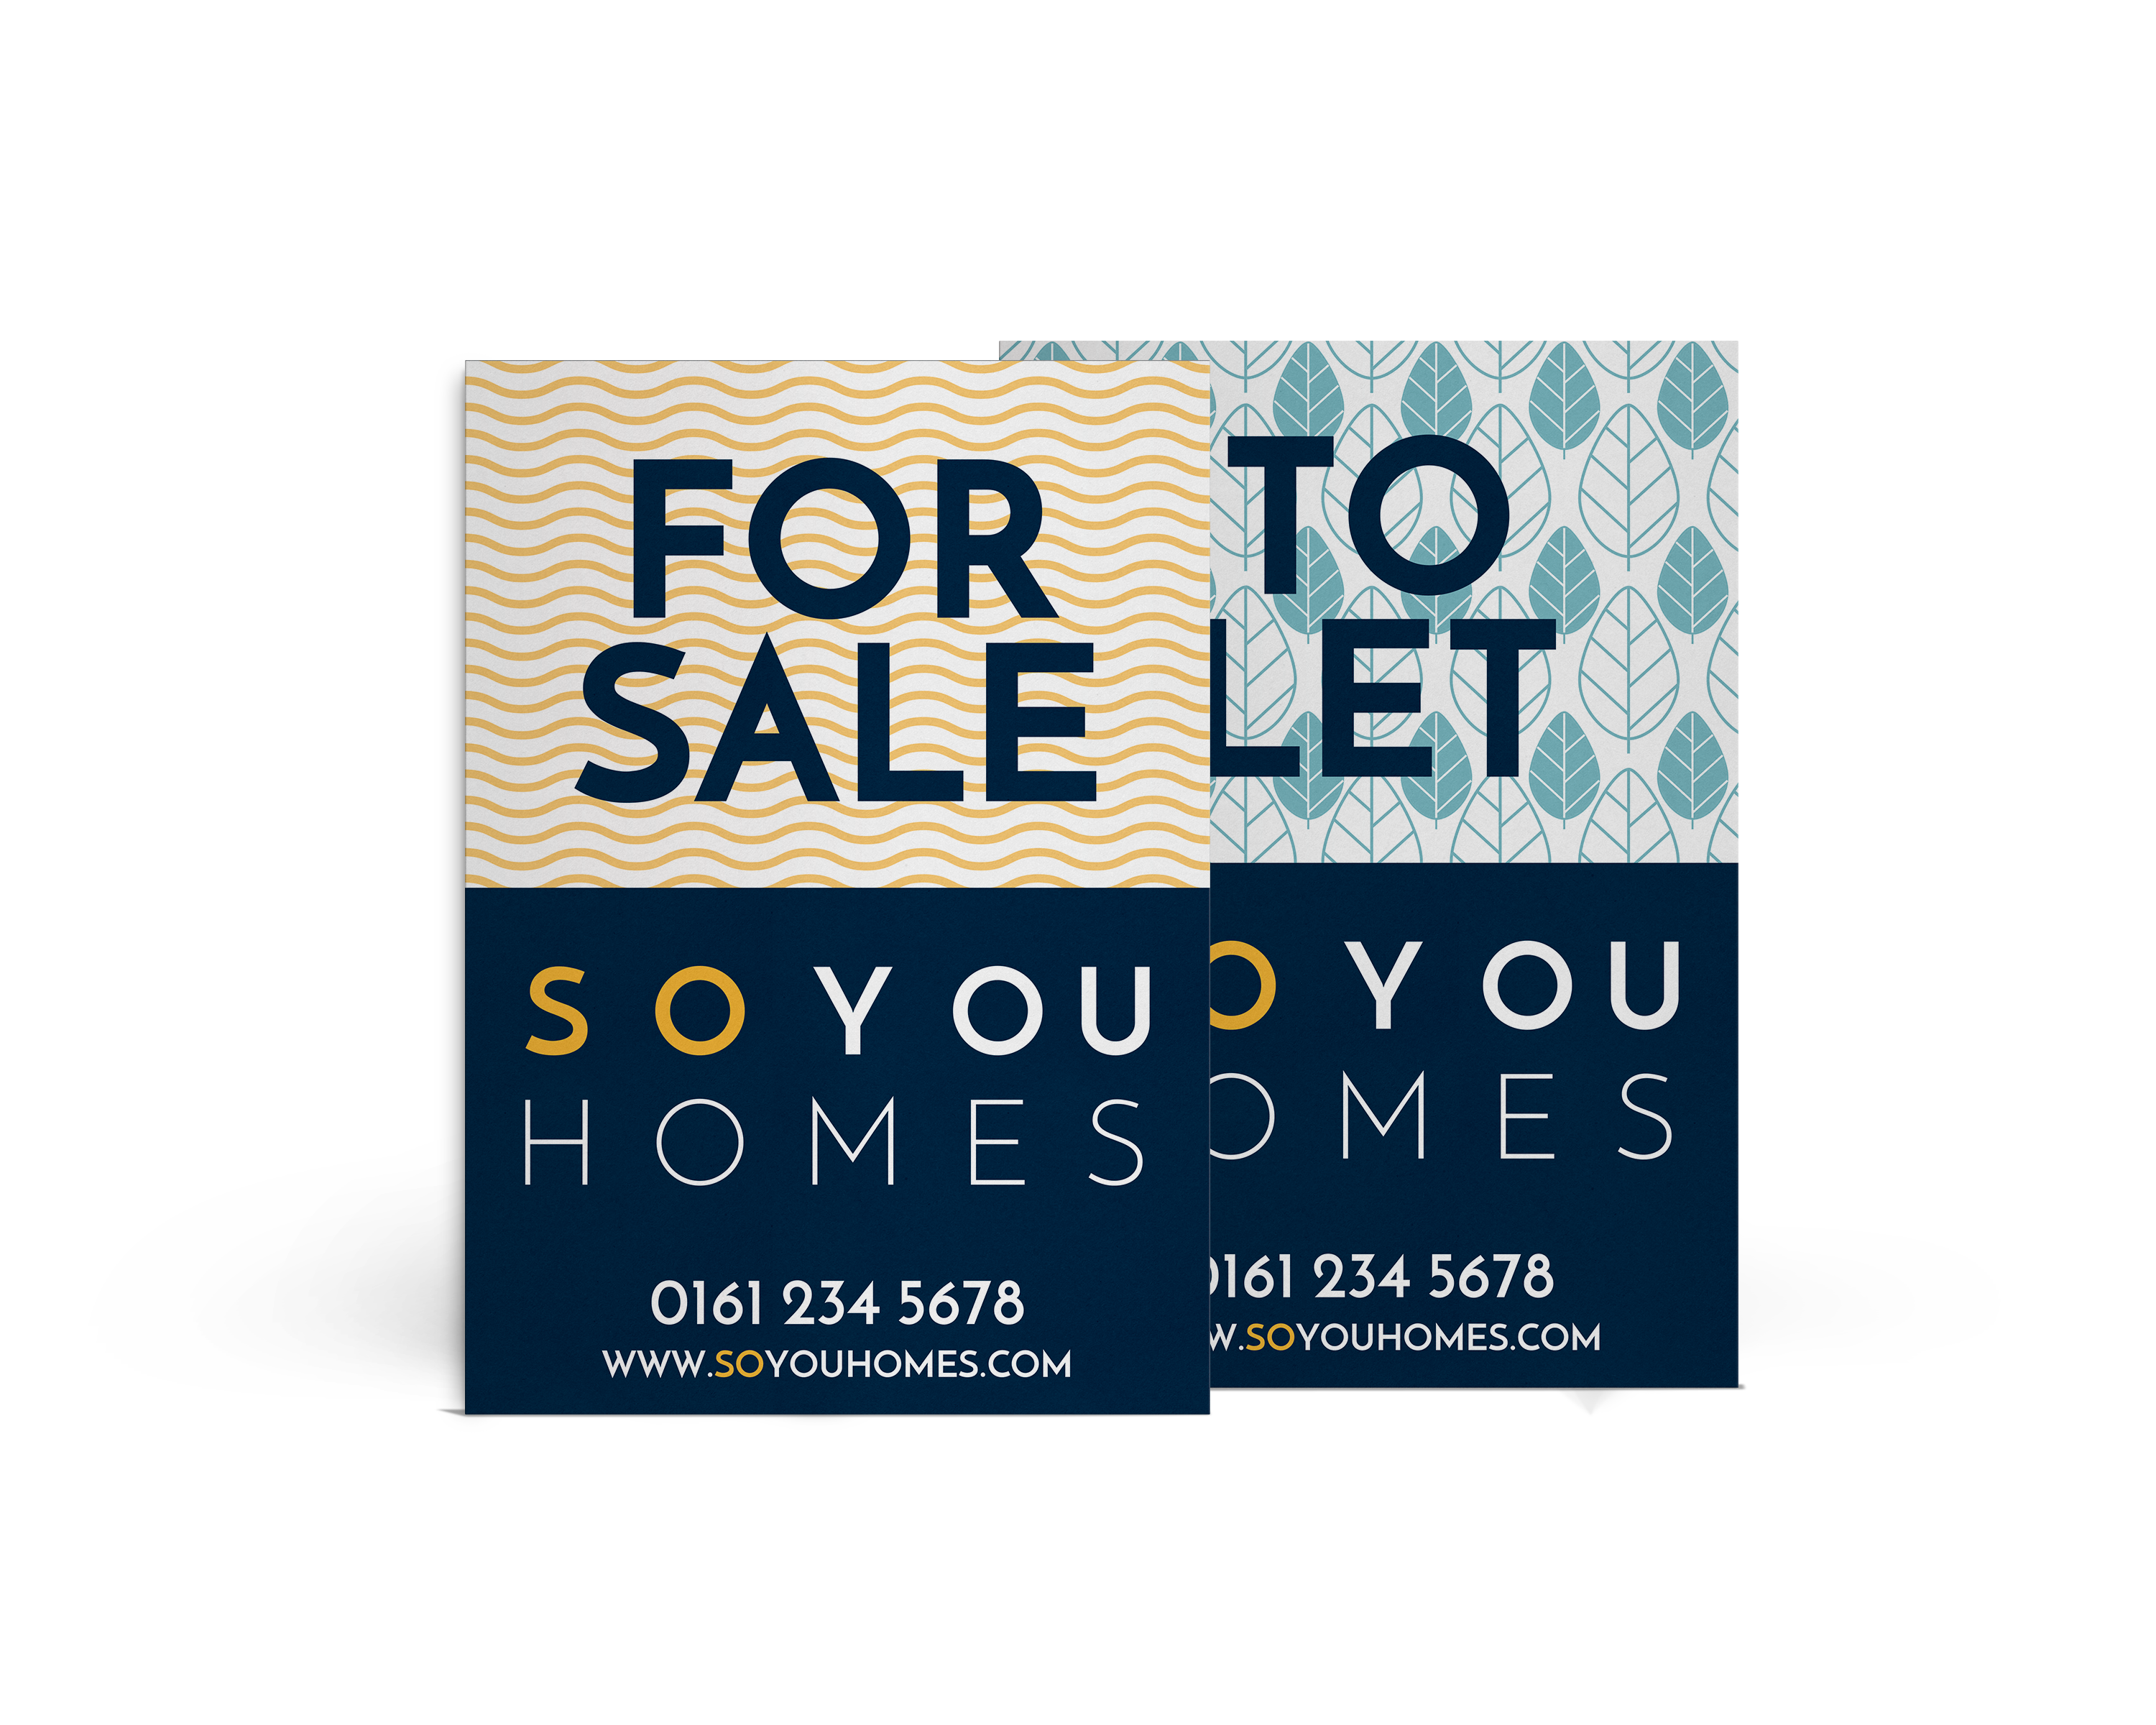 So You Homes To Let and For Sale Signs with patterned backgrounds